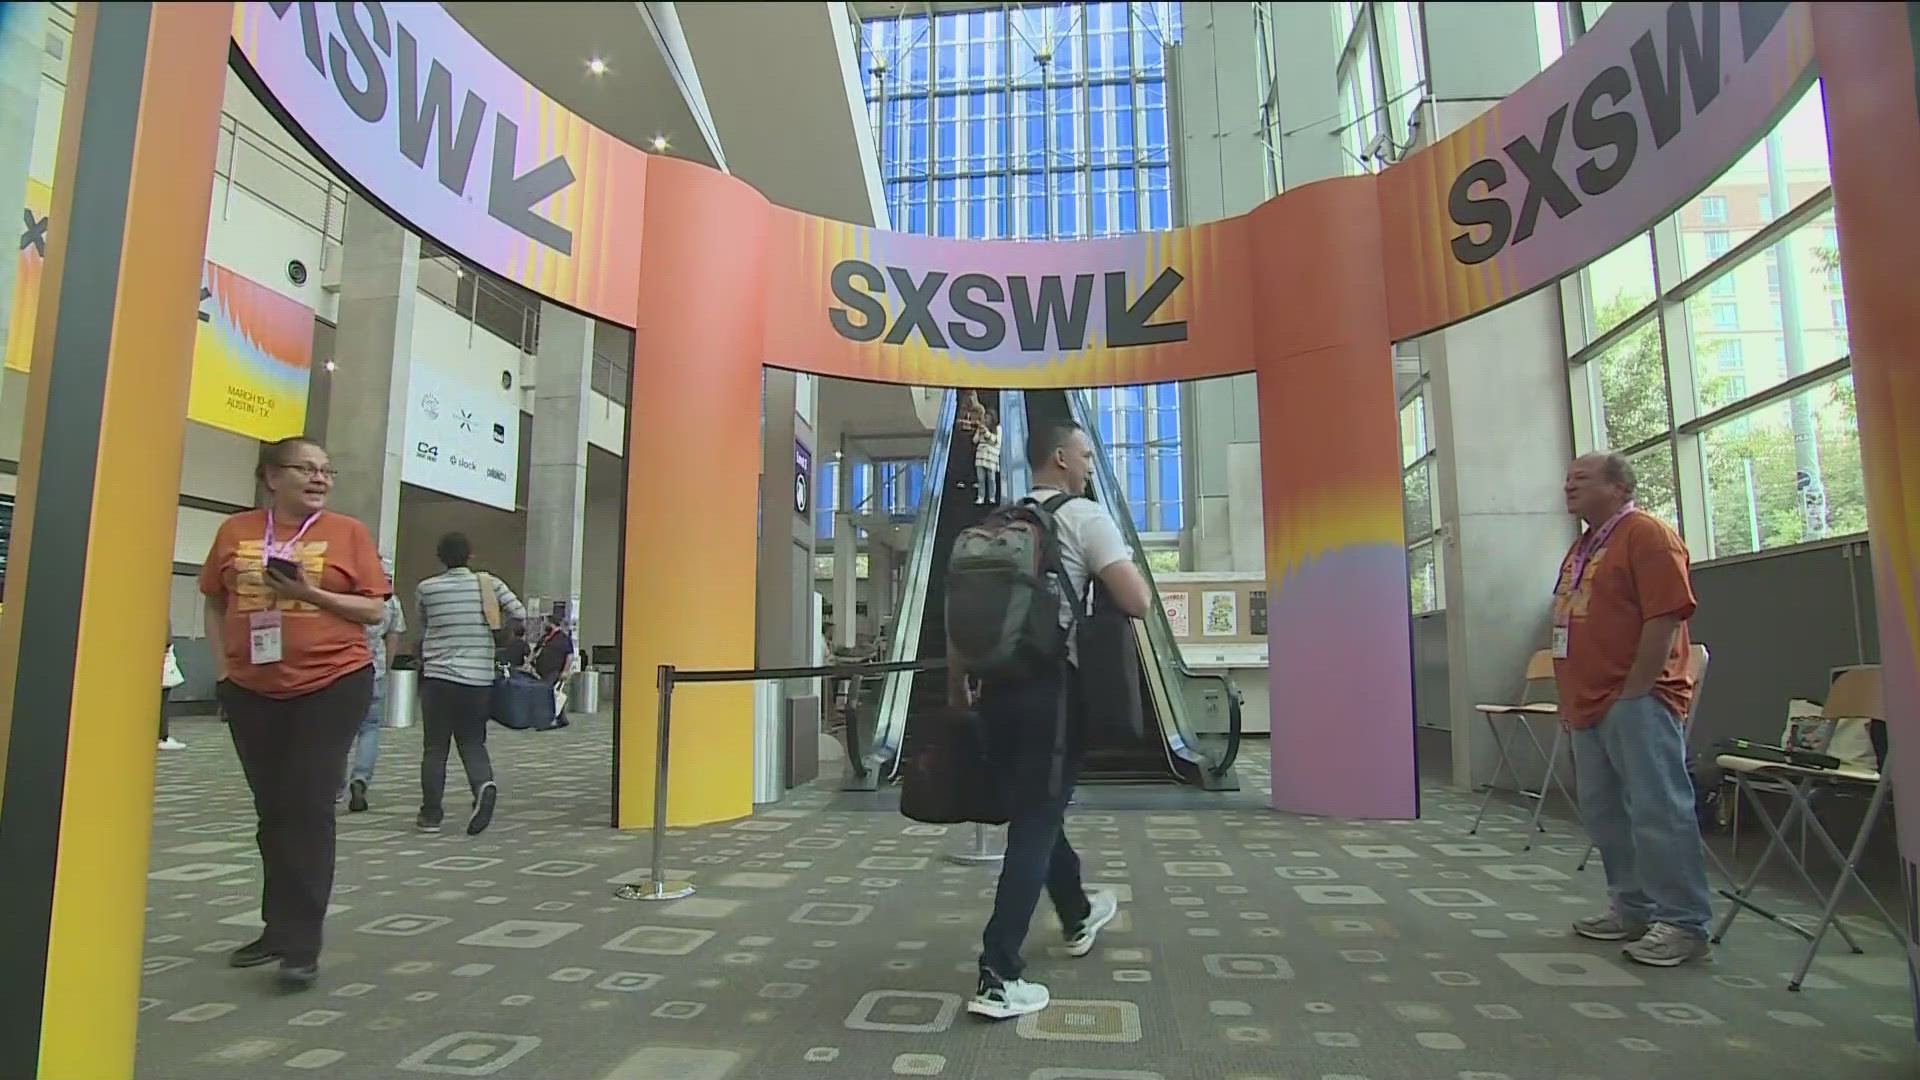 There are tons of events that you can get in for free during SXSW. Events include pop-ups, performances and exhibitions all throughout the City of Austin.